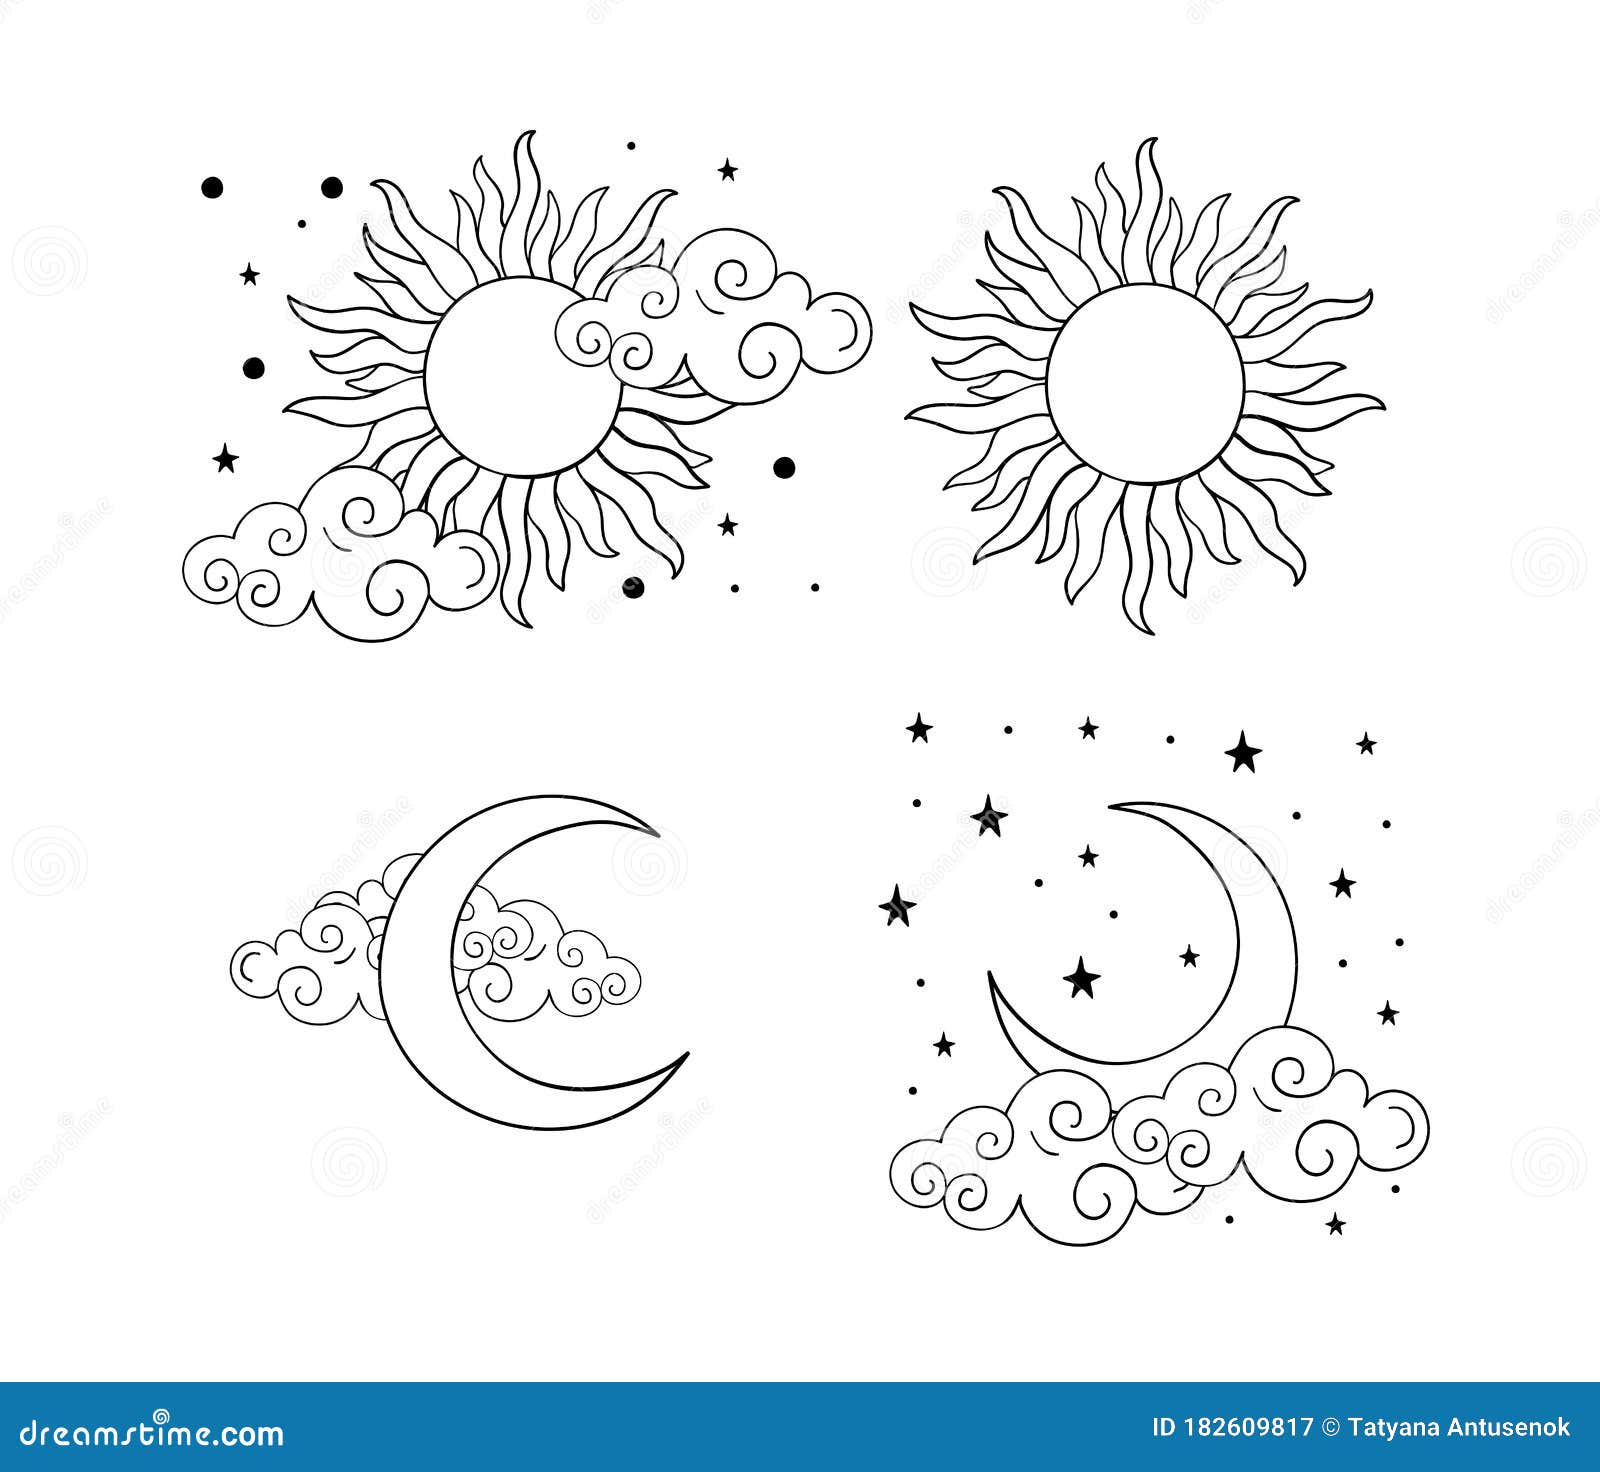 Mystical Boho Tattoos with Sun, Crescent, Stars and Clouds. Linear Design,  Hand Drawing Stock Vector - Illustration of bohemian, graphic: 182609817